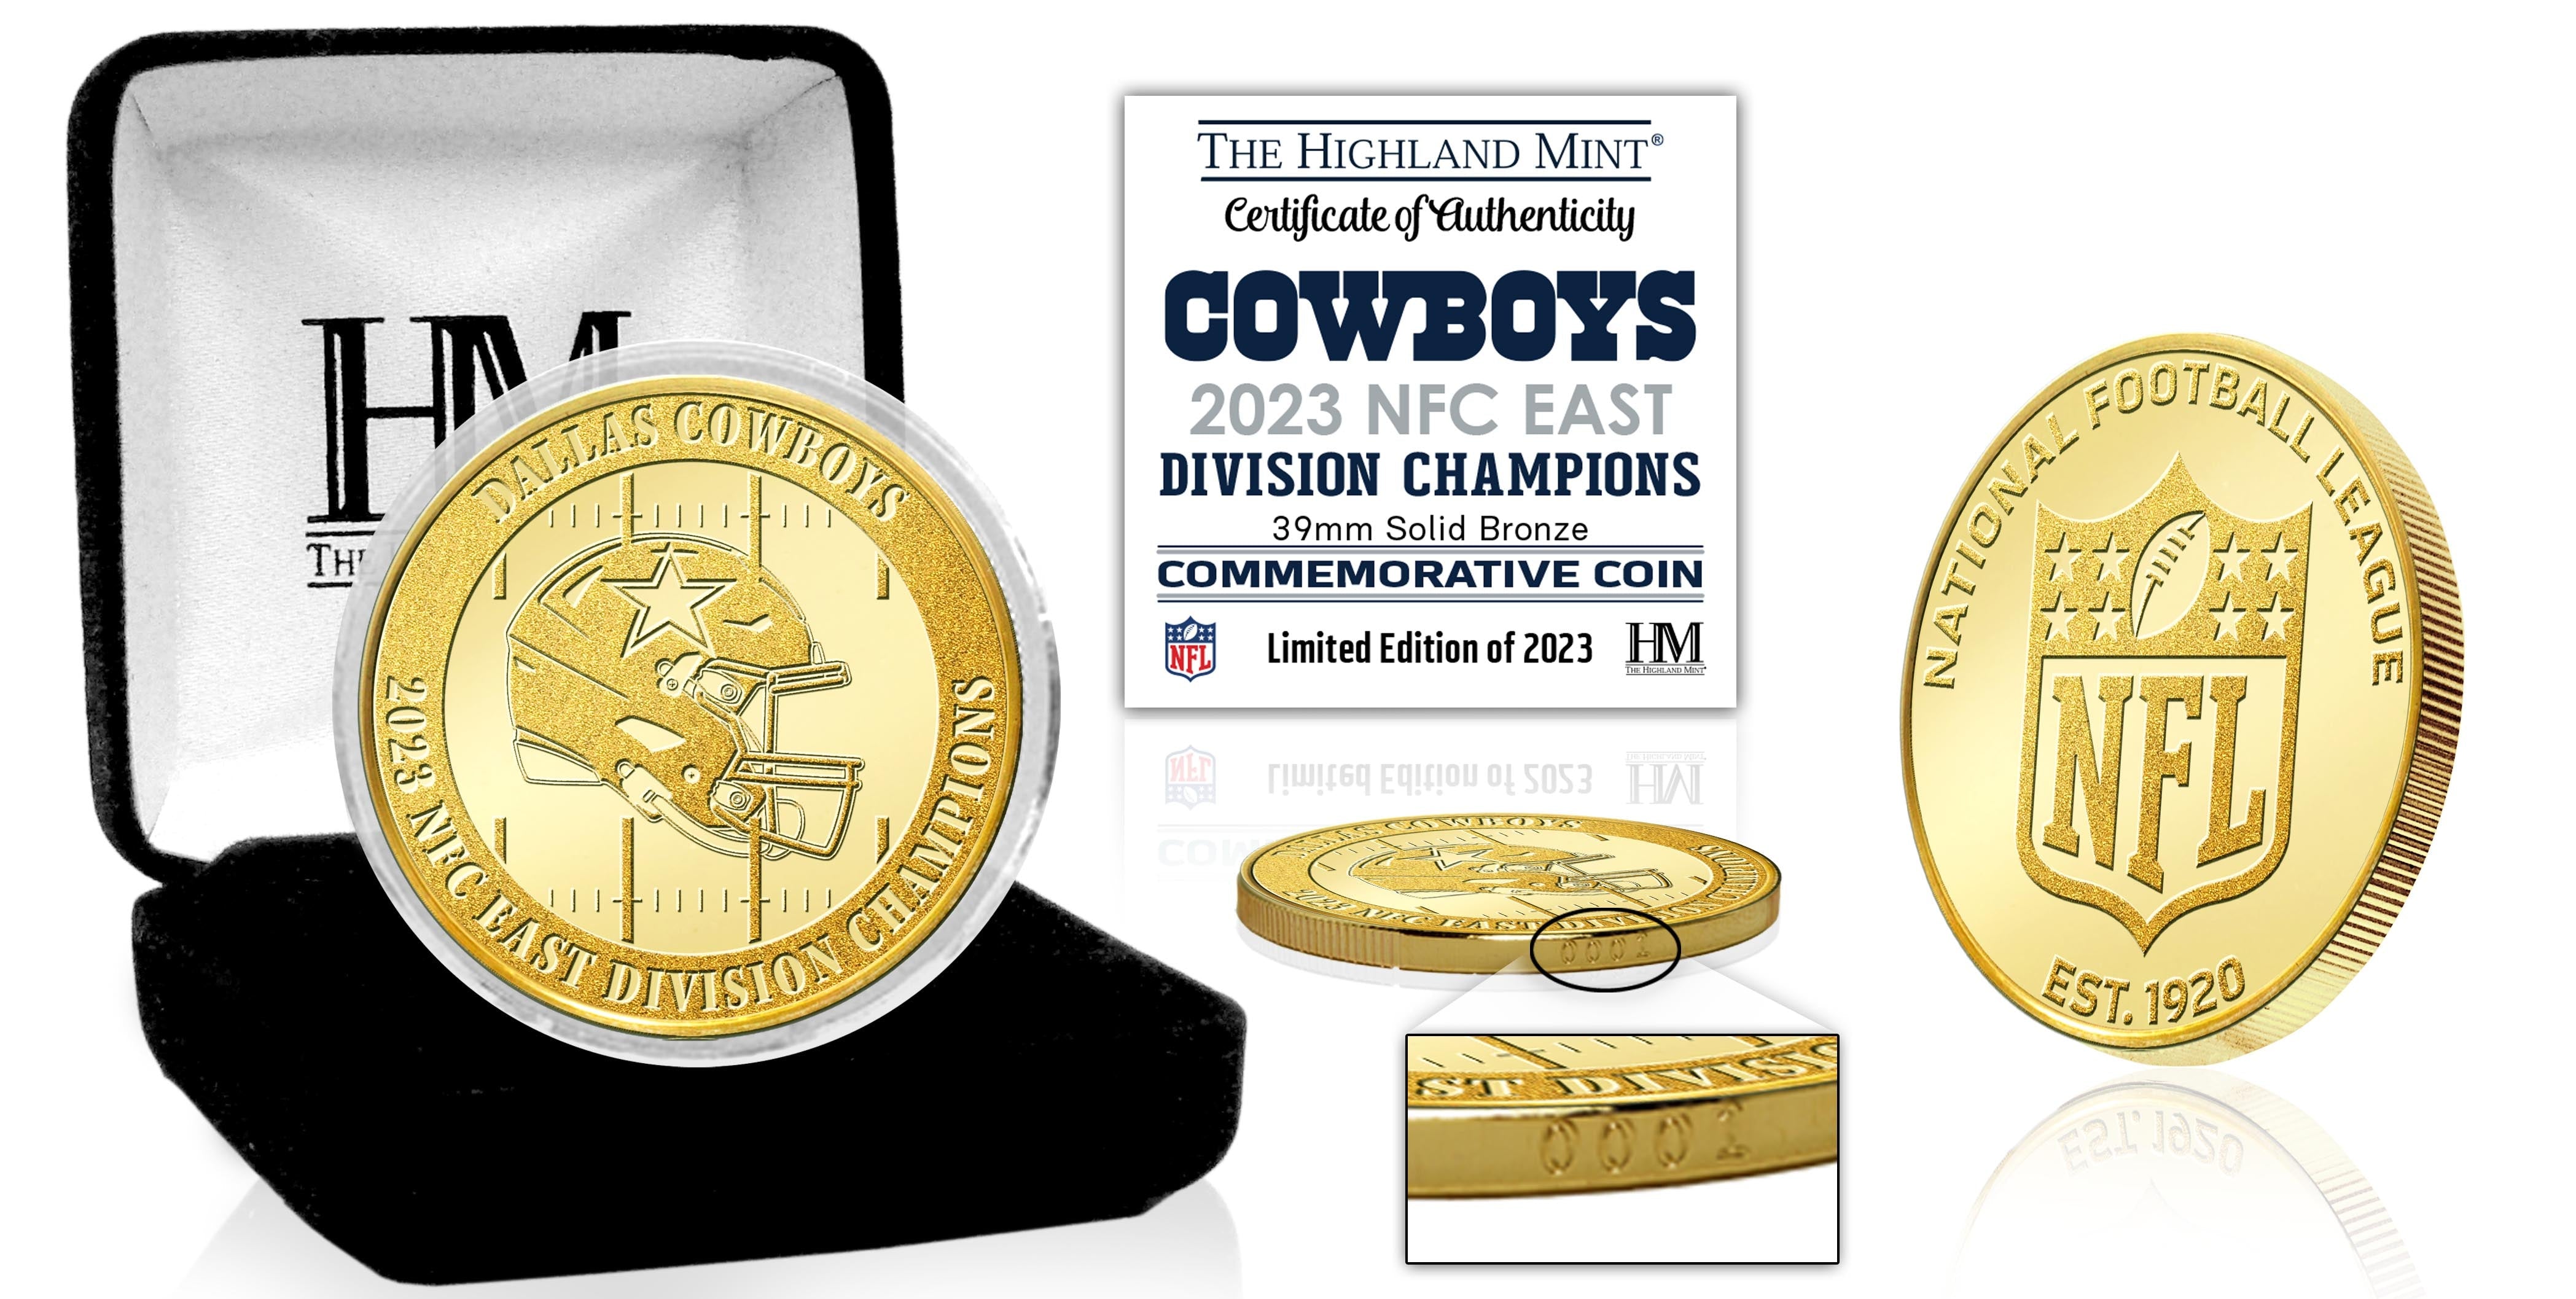 Dallas Cowboys 2023 NFC East Division Champions Bronze Coin